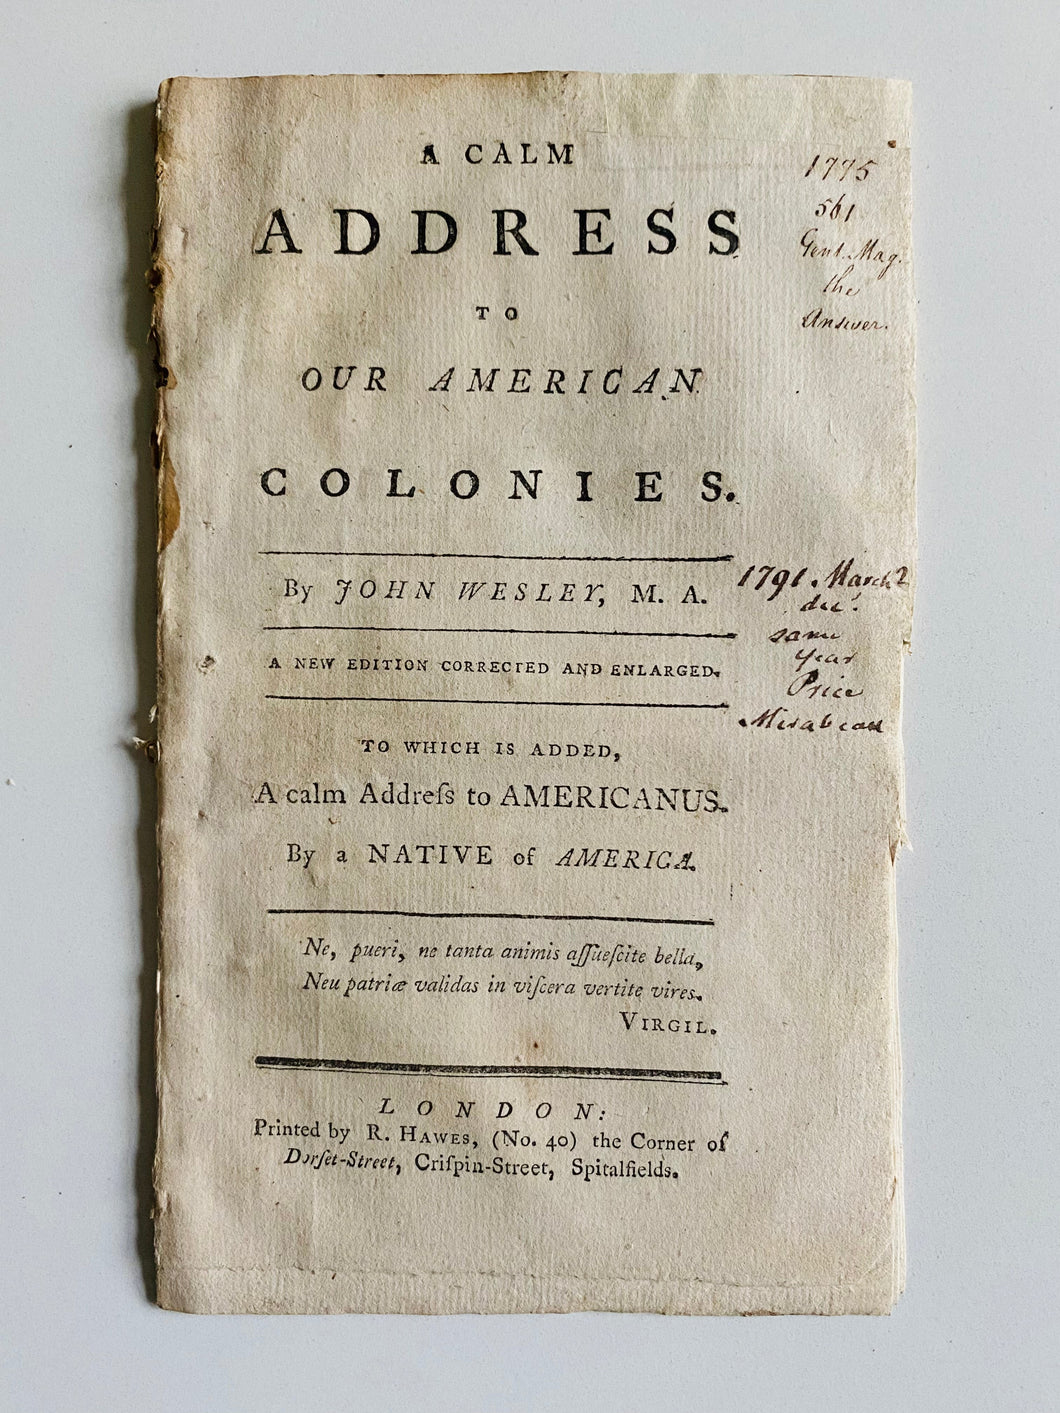 1775 JOHN WESLEY. An Address to American Colonies Urging Against the Revolution.